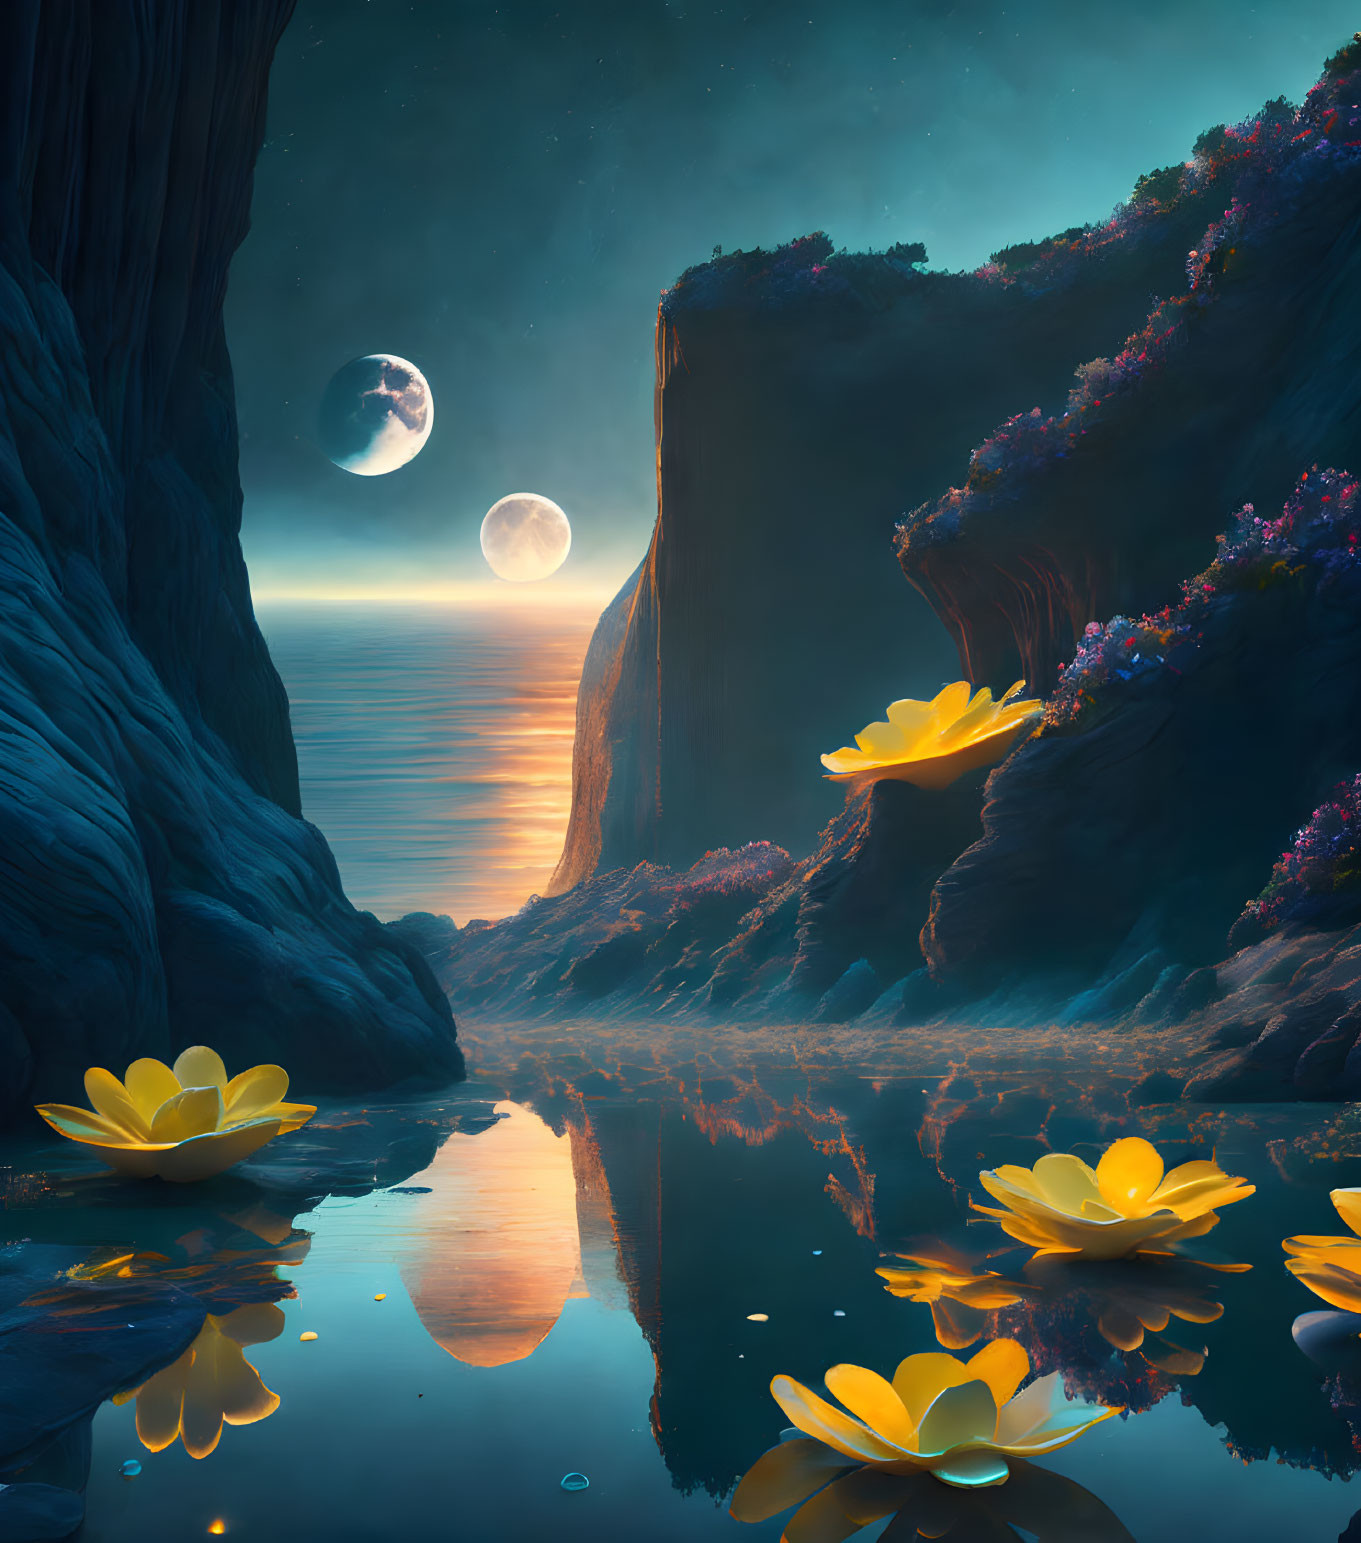 Nighttime Seascape with Cliff, Reflecting Water, Glowing Flowers, Dual-Moon Sky